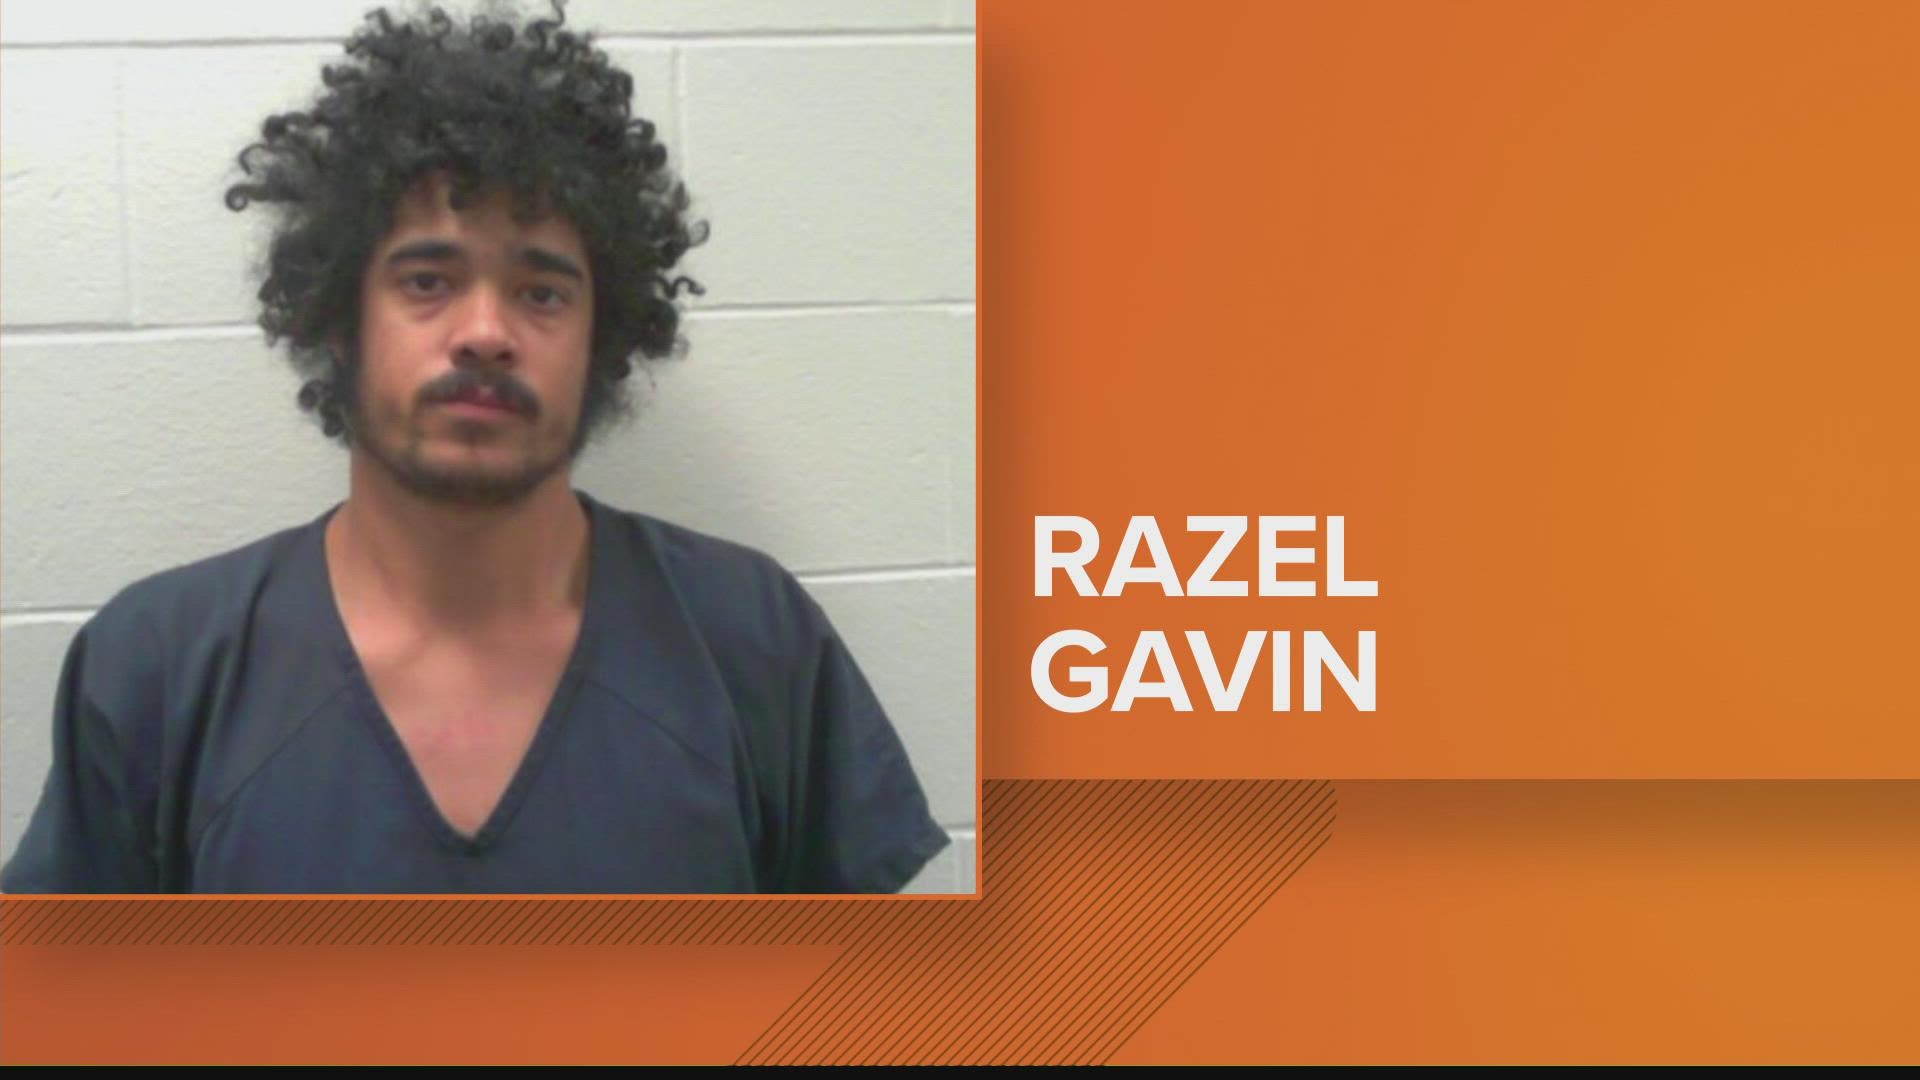 Razel M. Gavin, 24, allegedly abducted the teen from a parking lot and repeatedly assaulted her, police said.